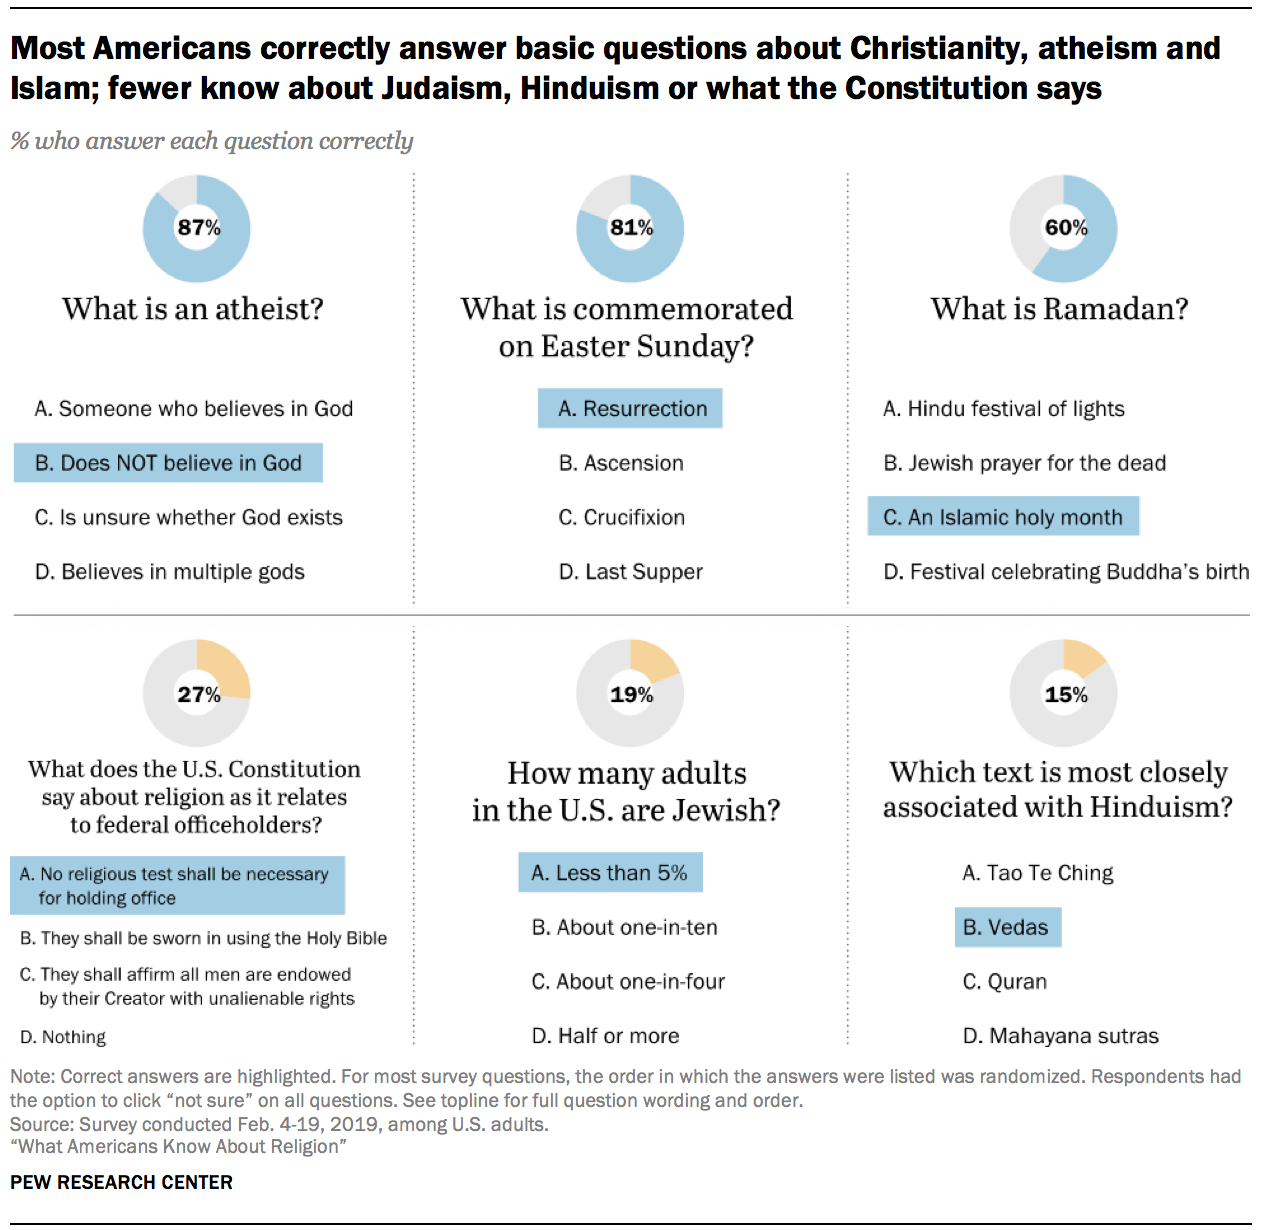 Most Americans correctly answer basic questions about Christianity, atheism and Islam; fewer know about Judaism, Hinduism or what the Constitution says